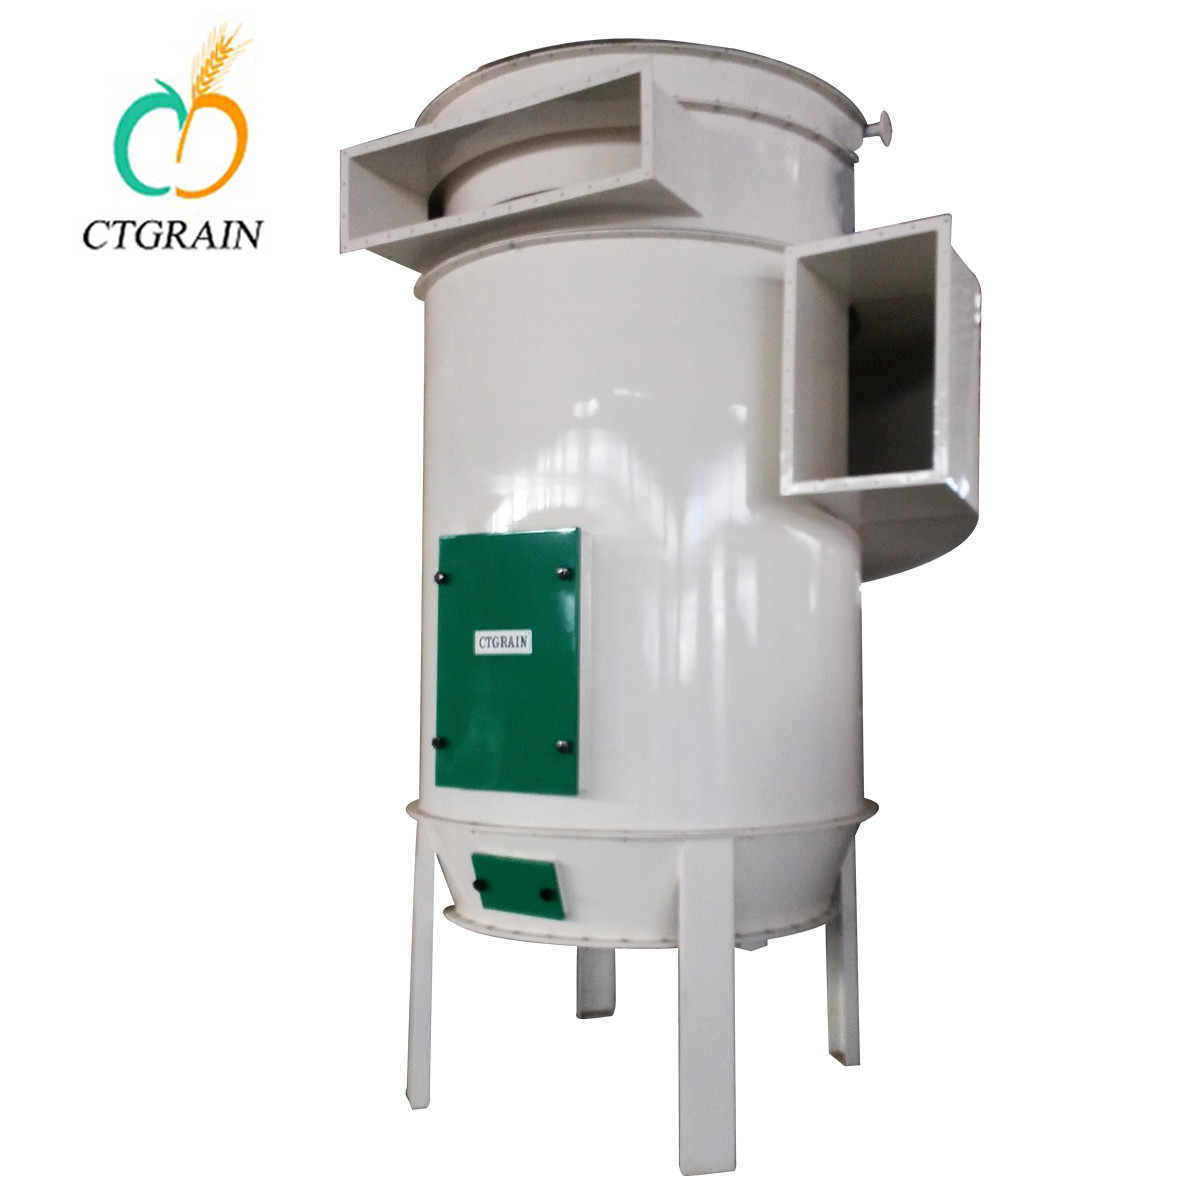 Wholesale Carbon Steel Grain Cleaning Machine Jet Dust Collector Filter TBLM 104 - 20 from china suppliers